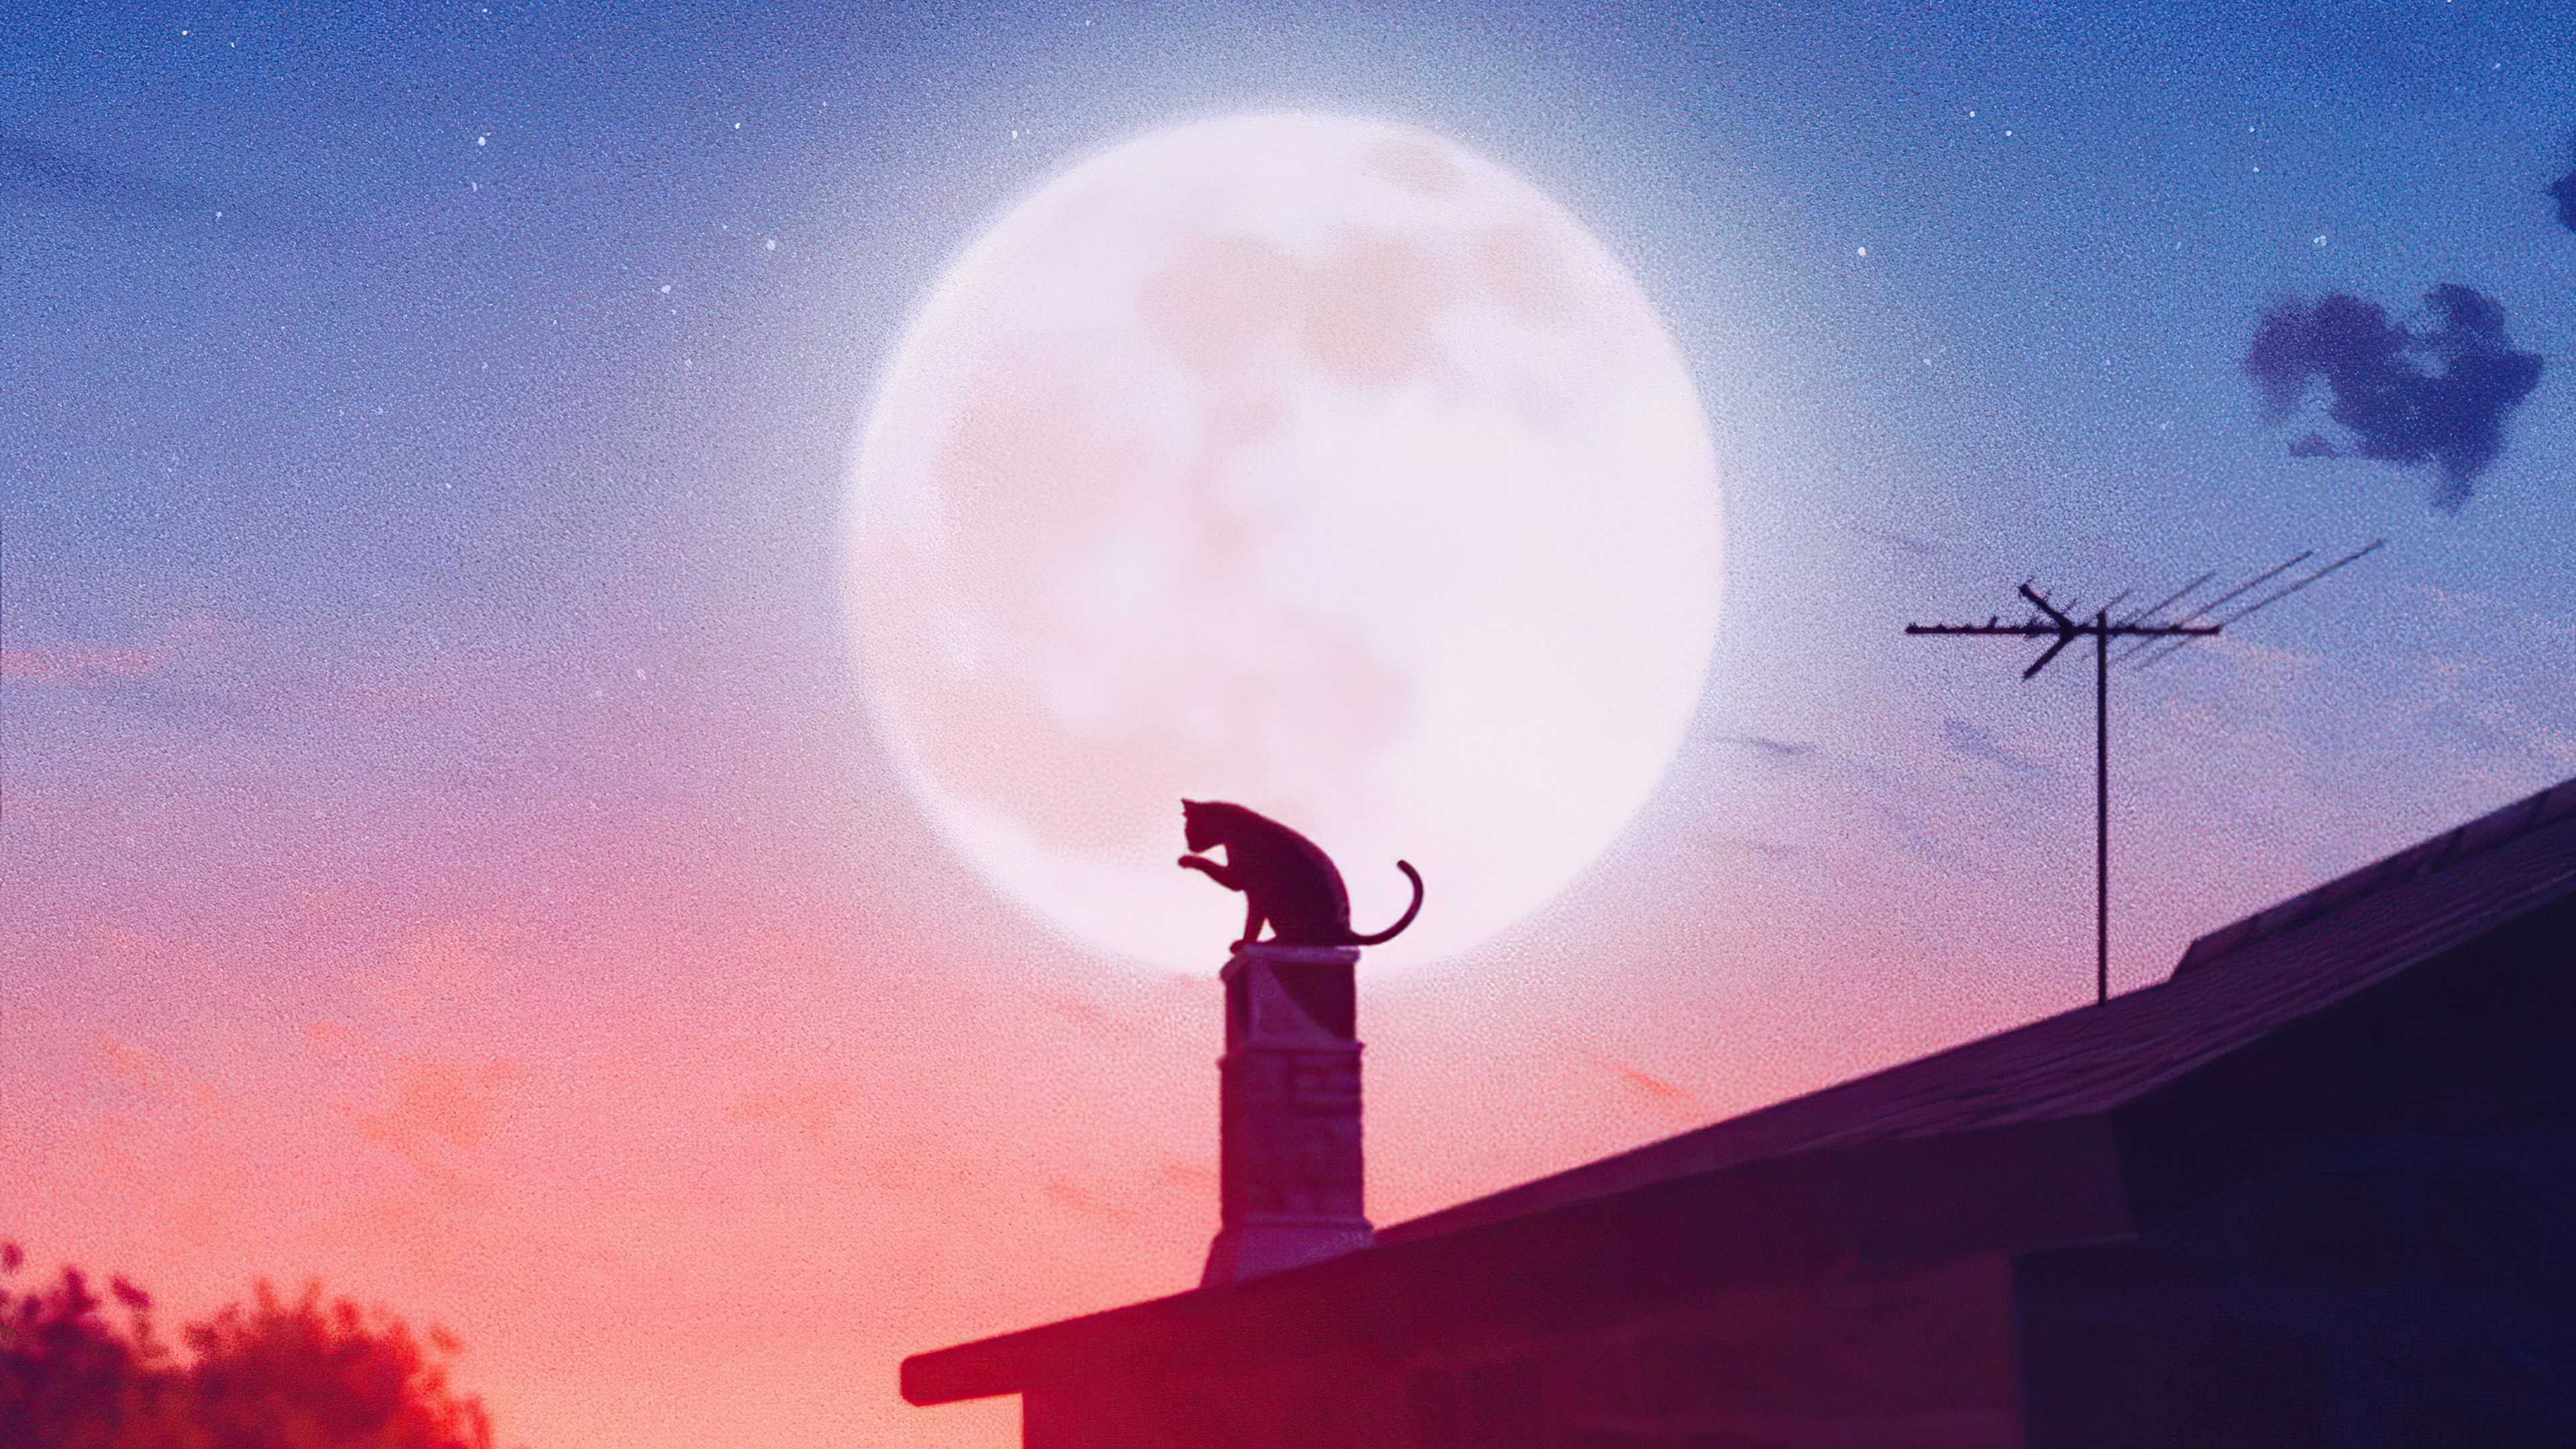 Cat Roof Big Moon 4k, HD Artist, 4k Wallpaper, Image, Background, Photo and Picture